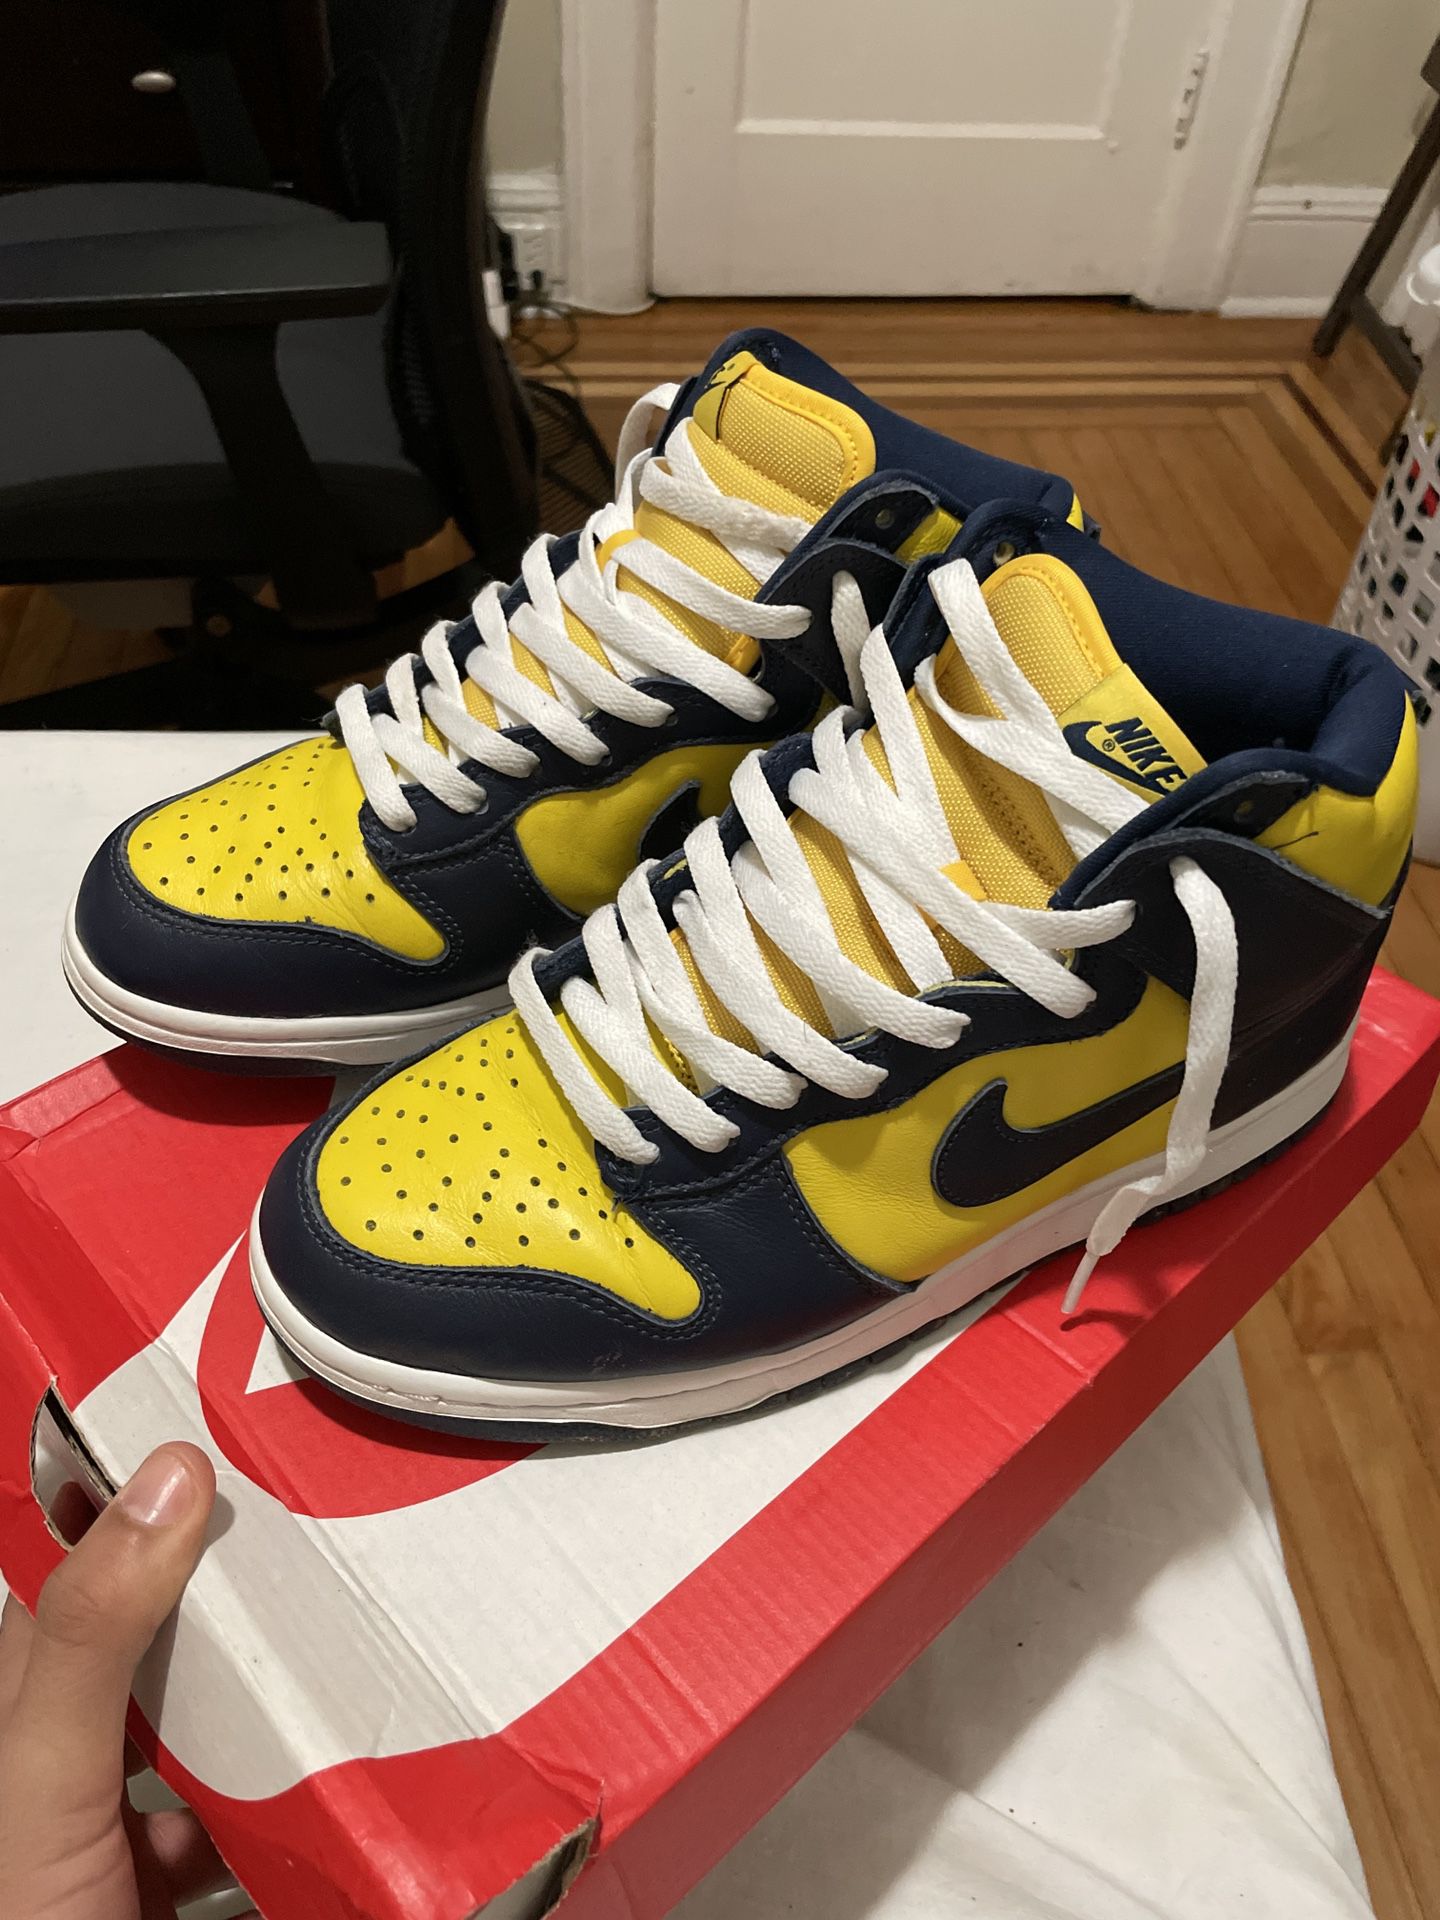 studie Grunde Berygtet Nike Dunk High Michigan for Sale in Union City, NJ - OfferUp